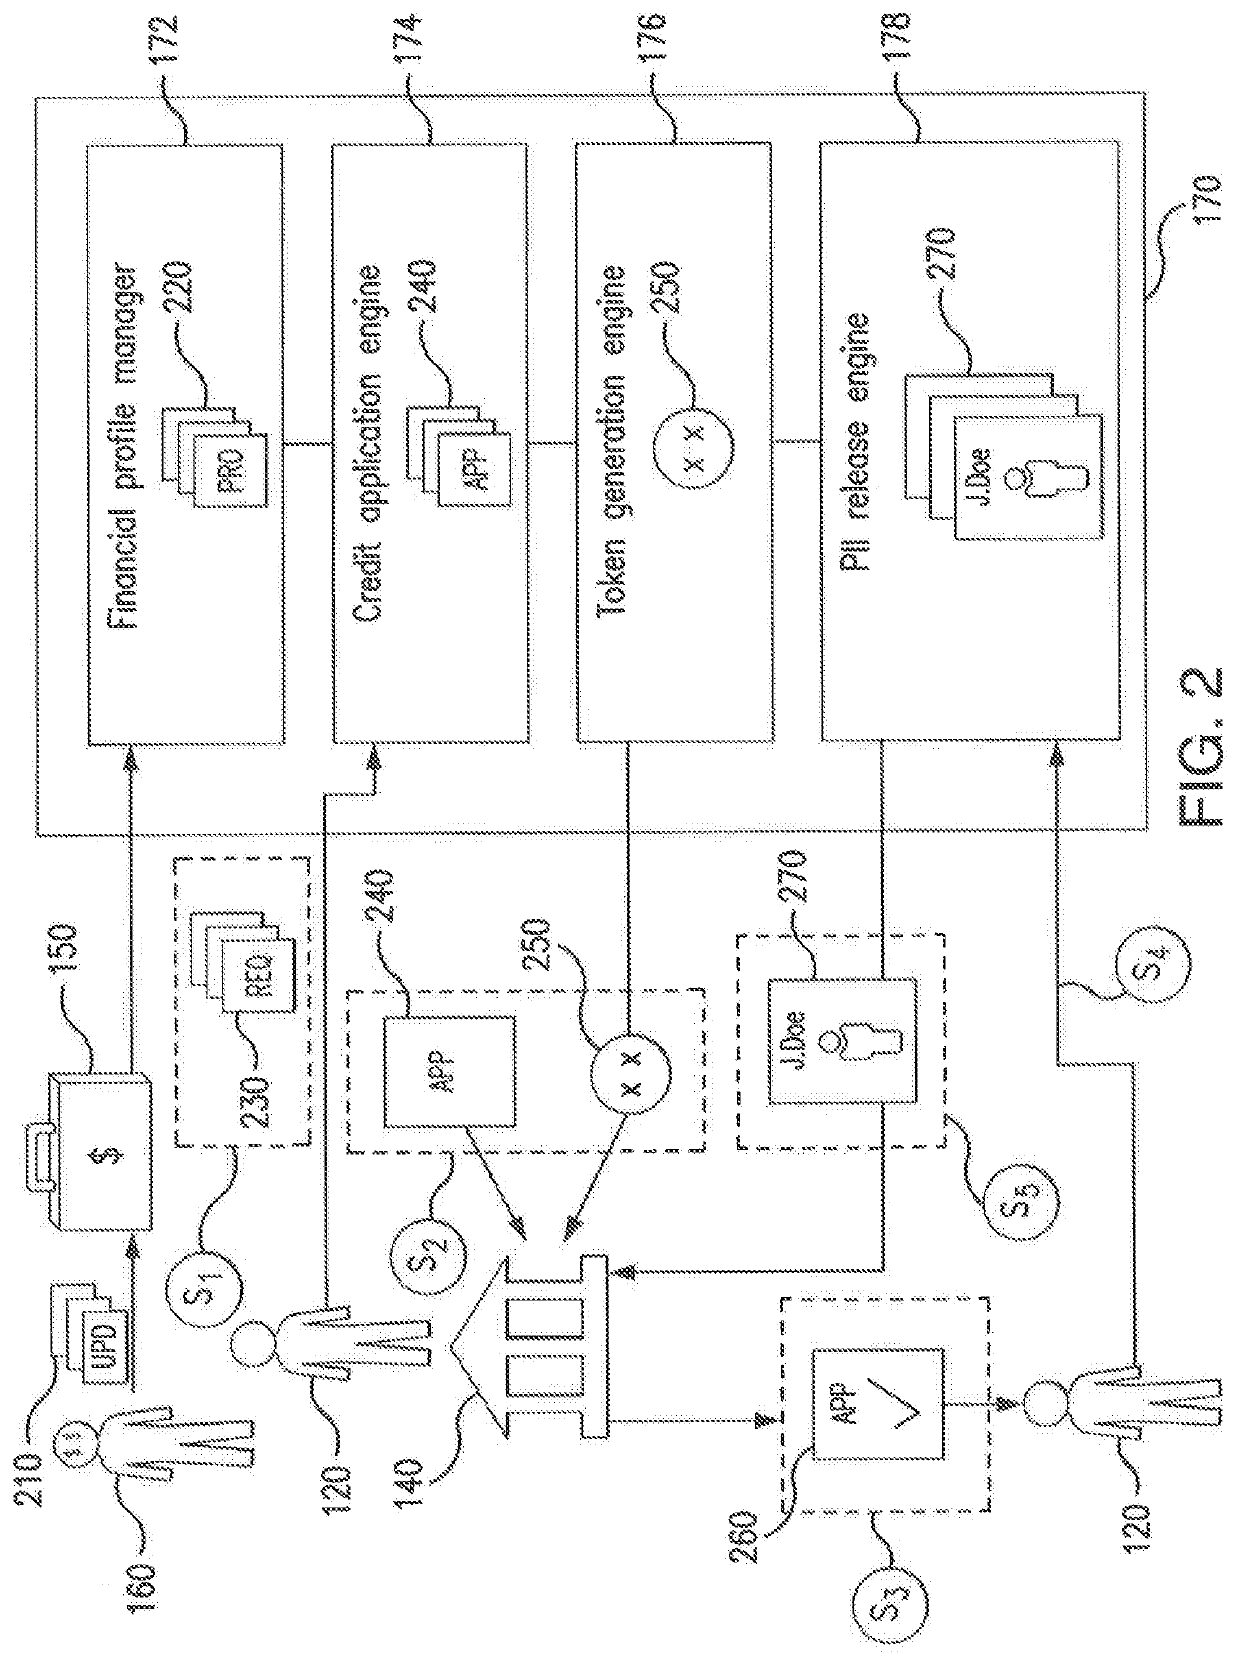 Systems and methods of securing sensitive data